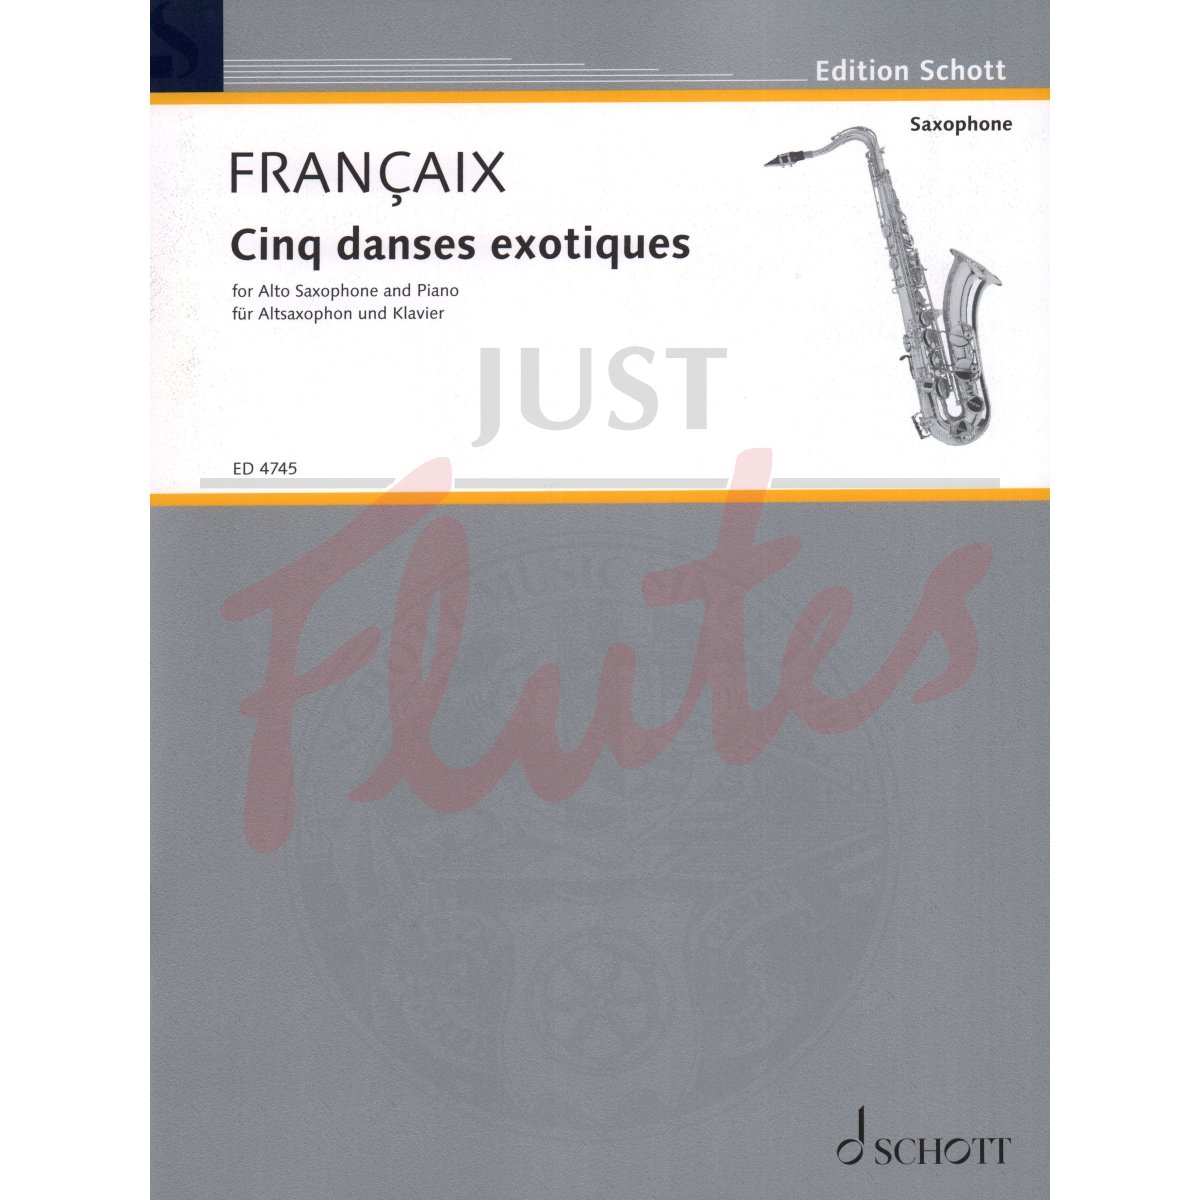 Five Exotic Dances for Alto Saxophone and Piano